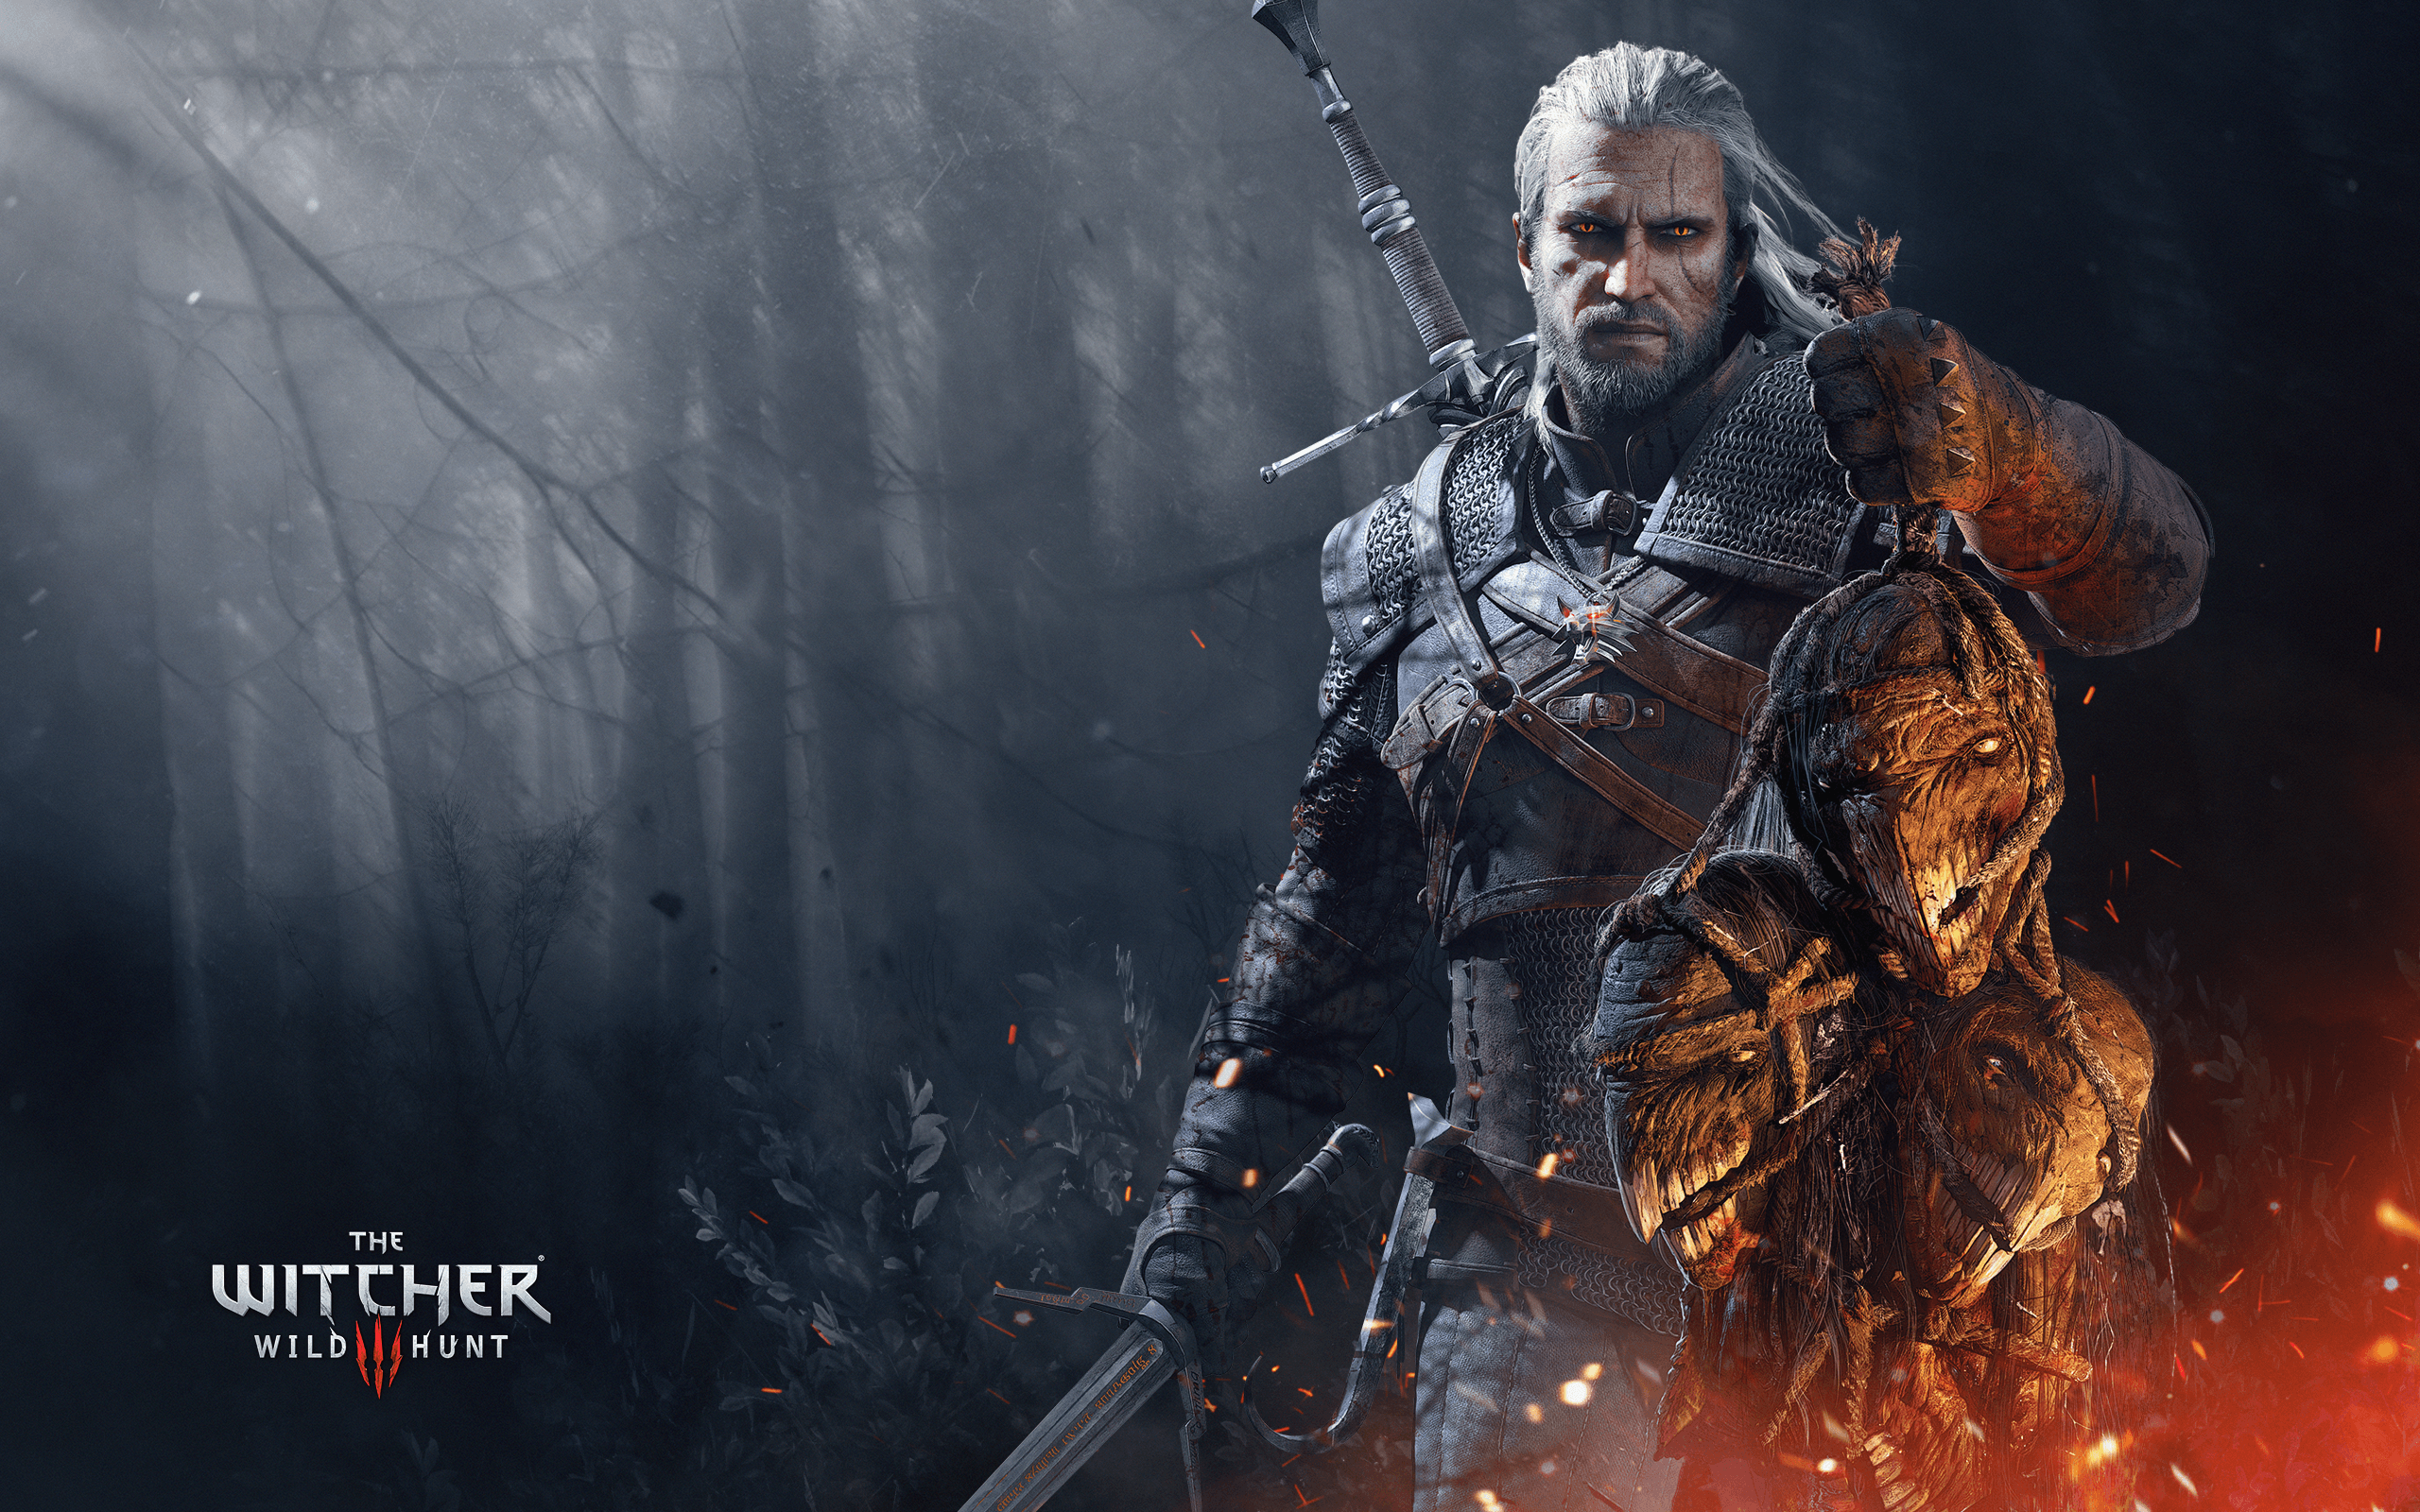 The Witcher 3: Wild Hunt Wallpaper Free The Witcher 3: Wild Hunt Background